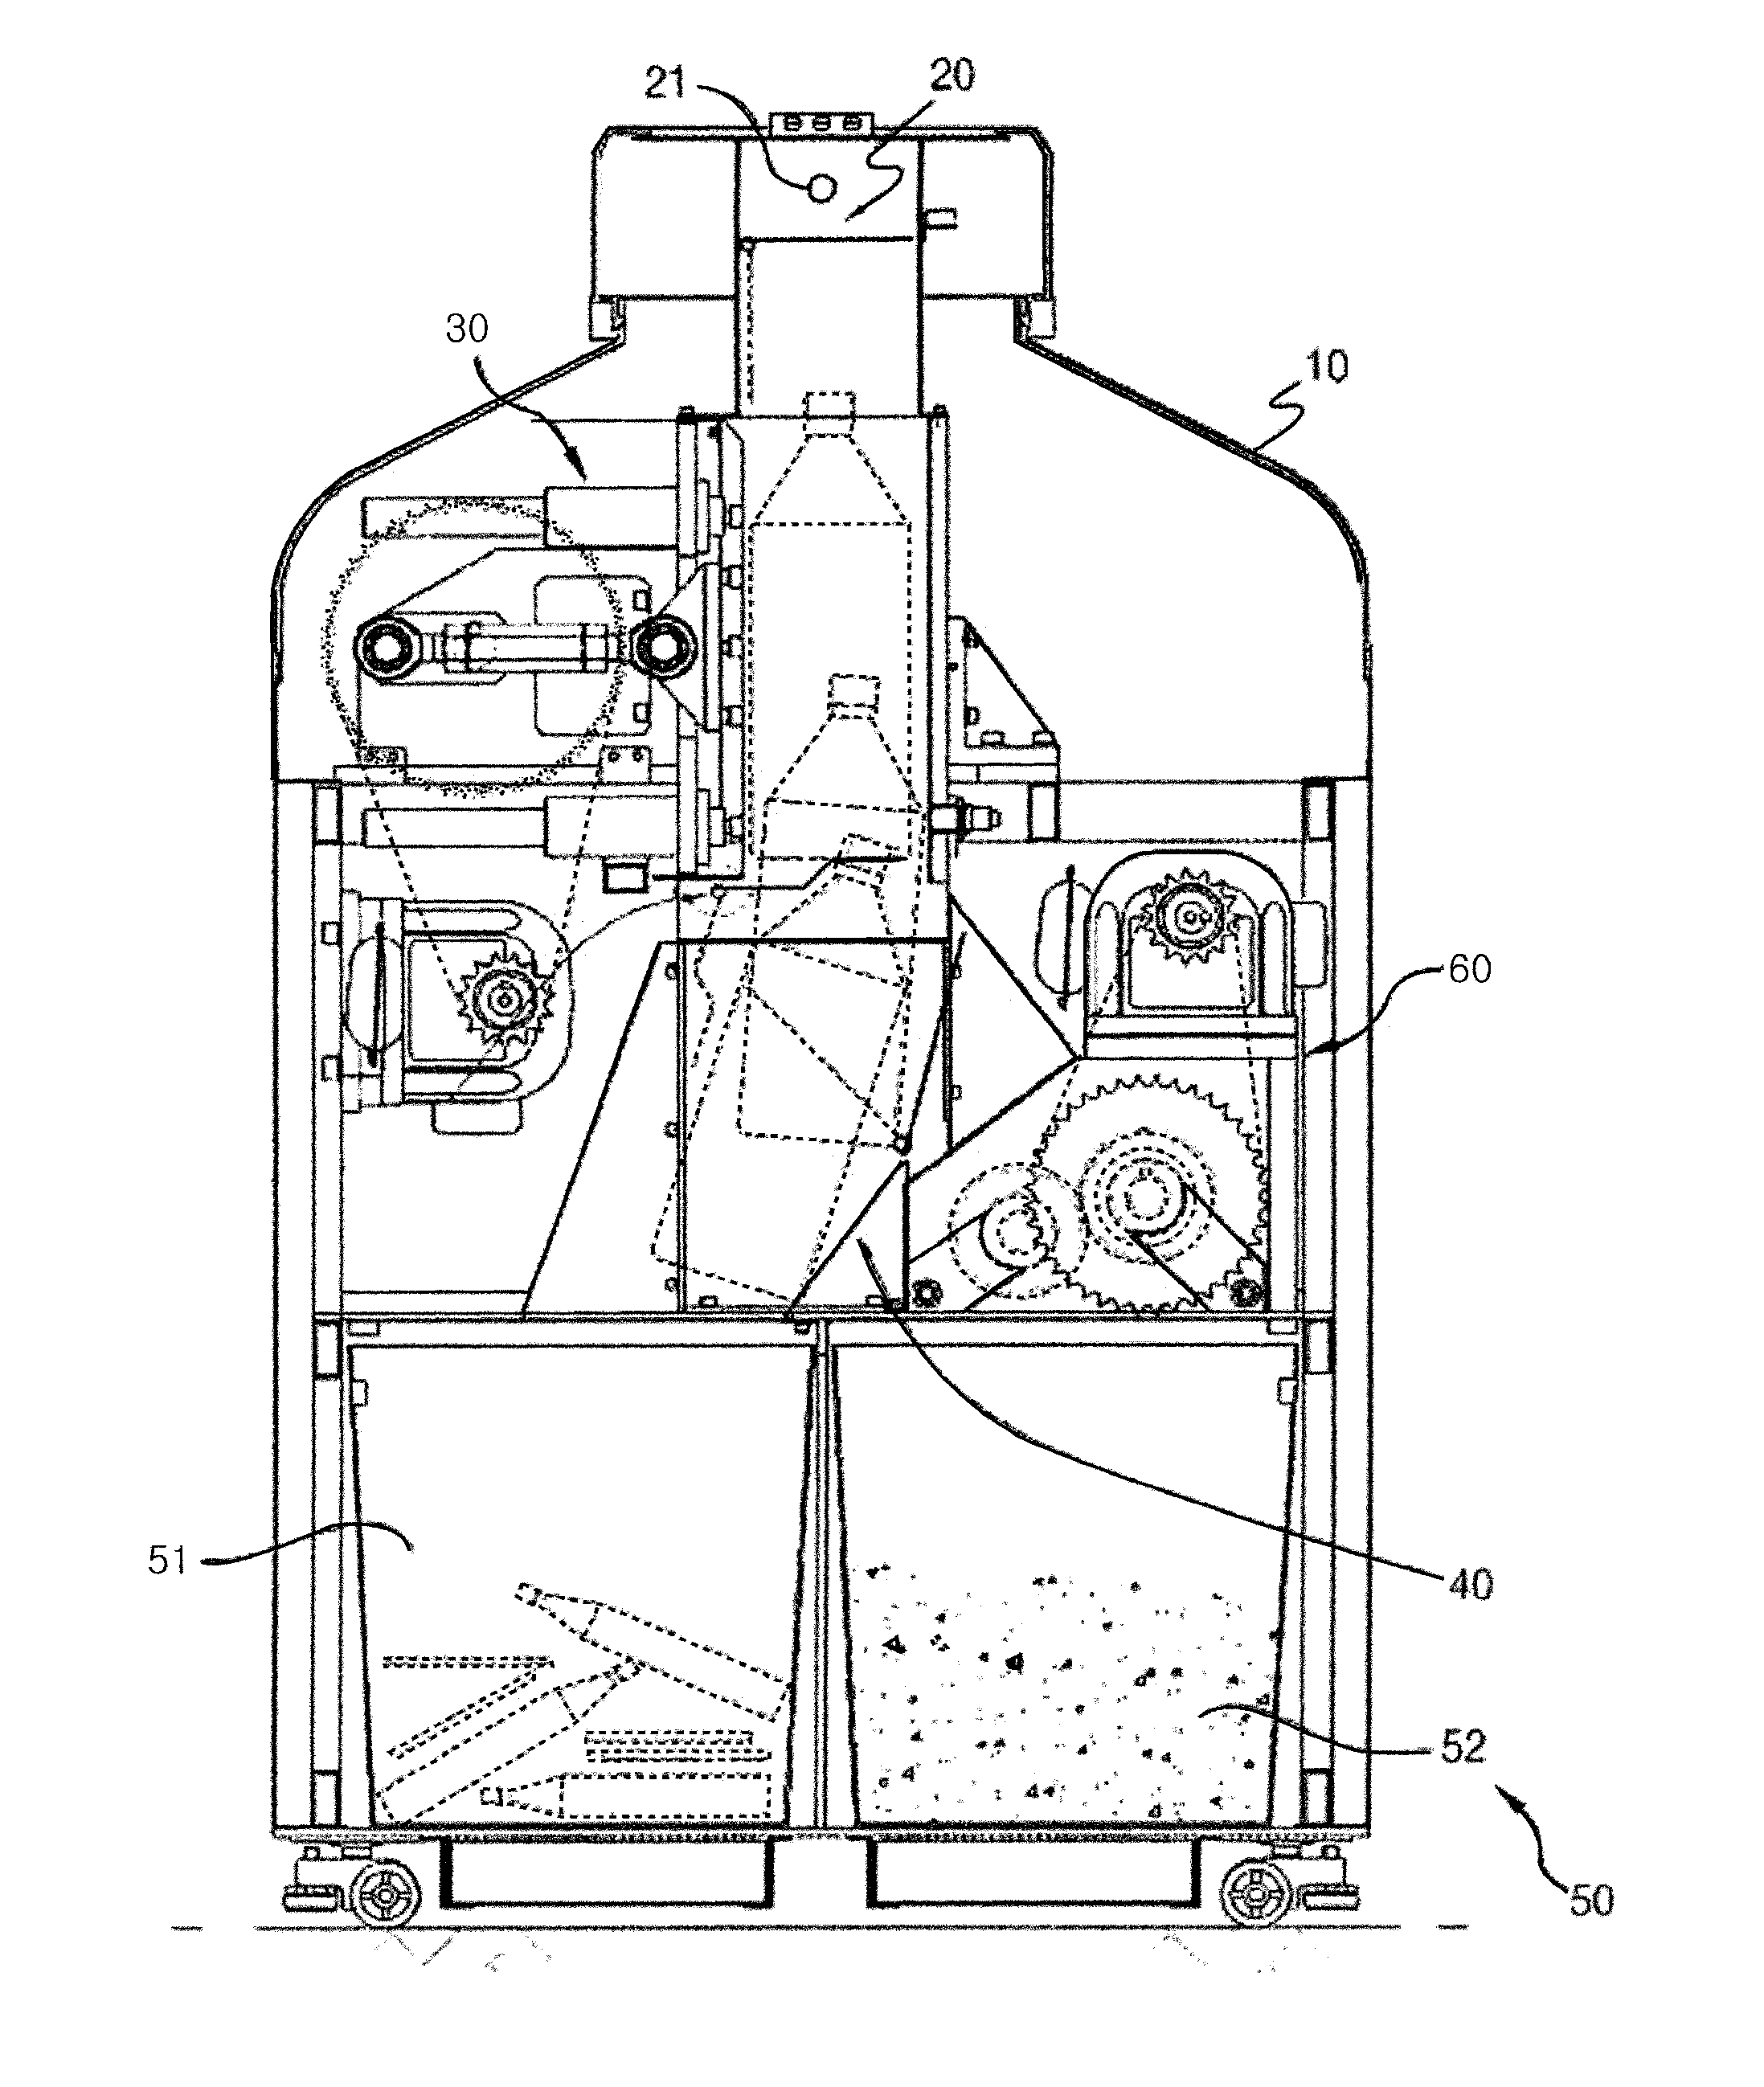 Selective collection system for recycling input materials